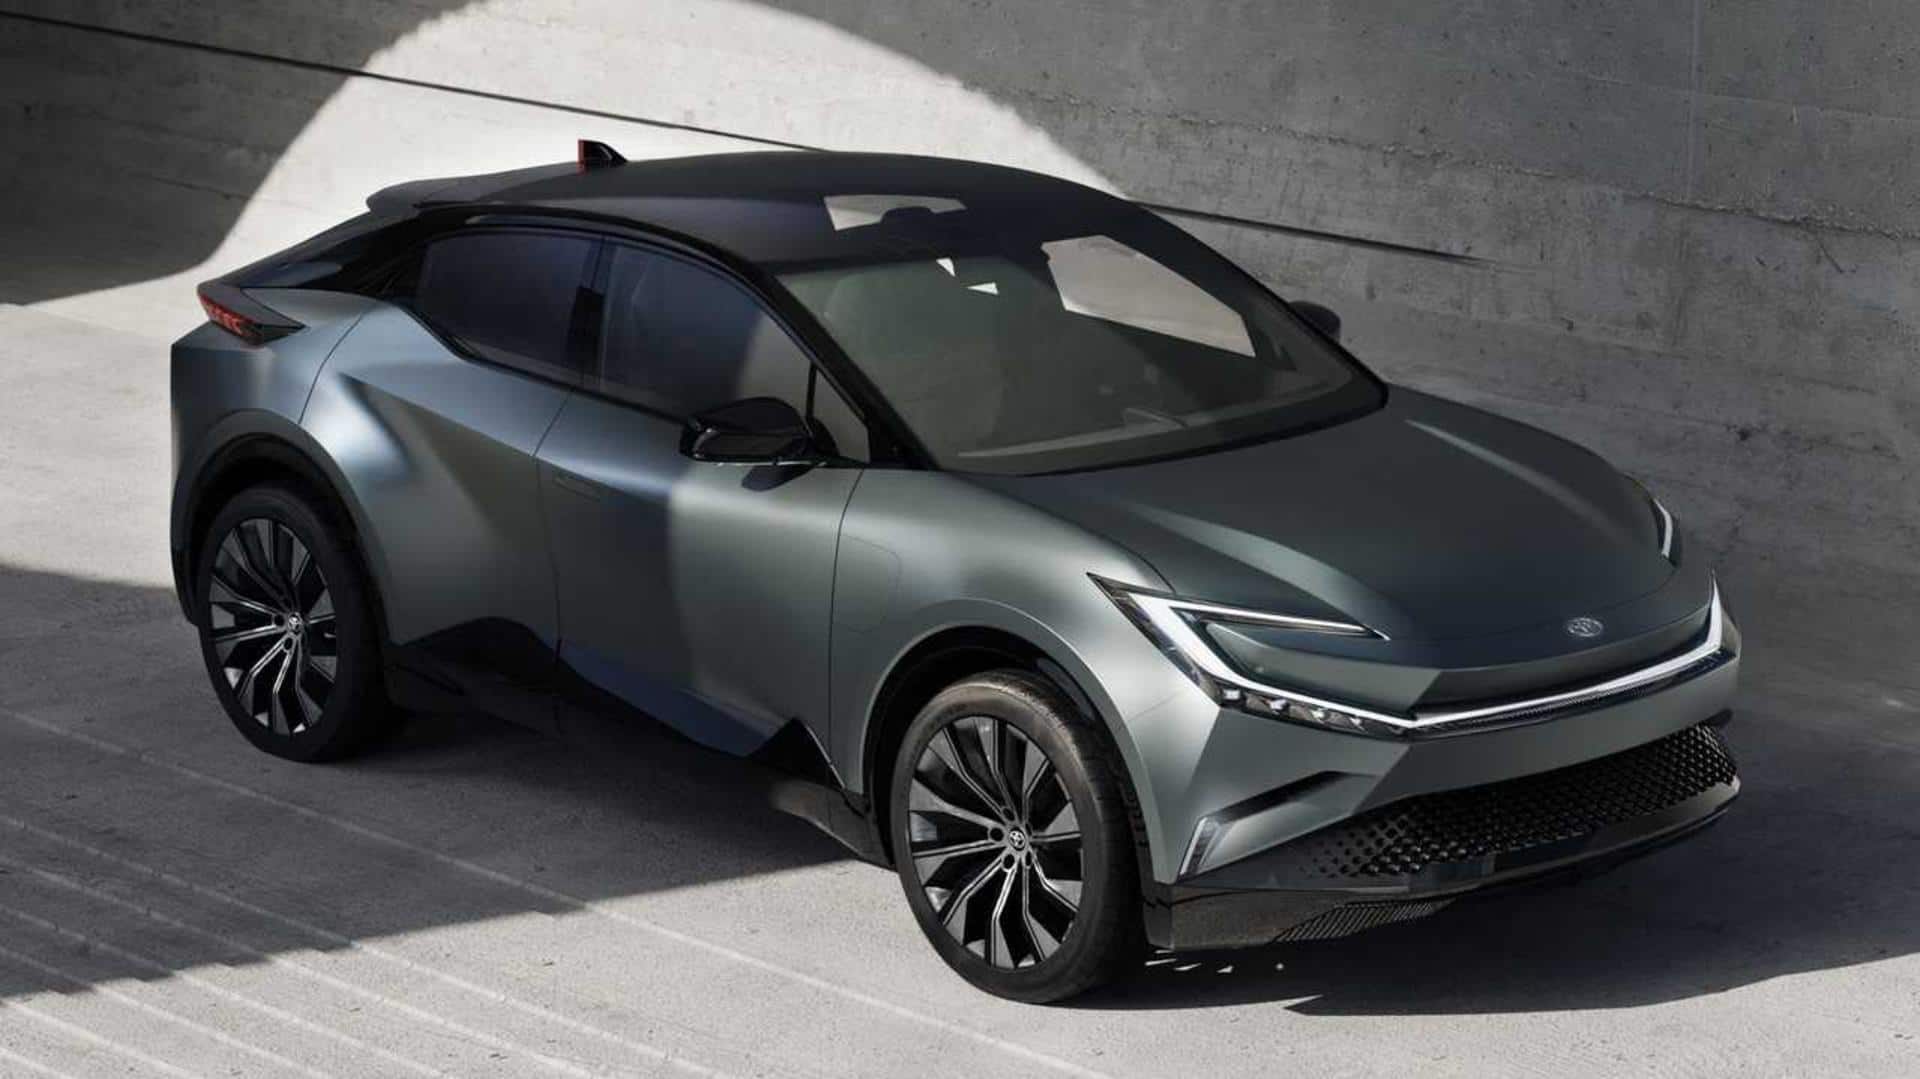 Toyota bZ compact SUV concept showcased; launch by 2026